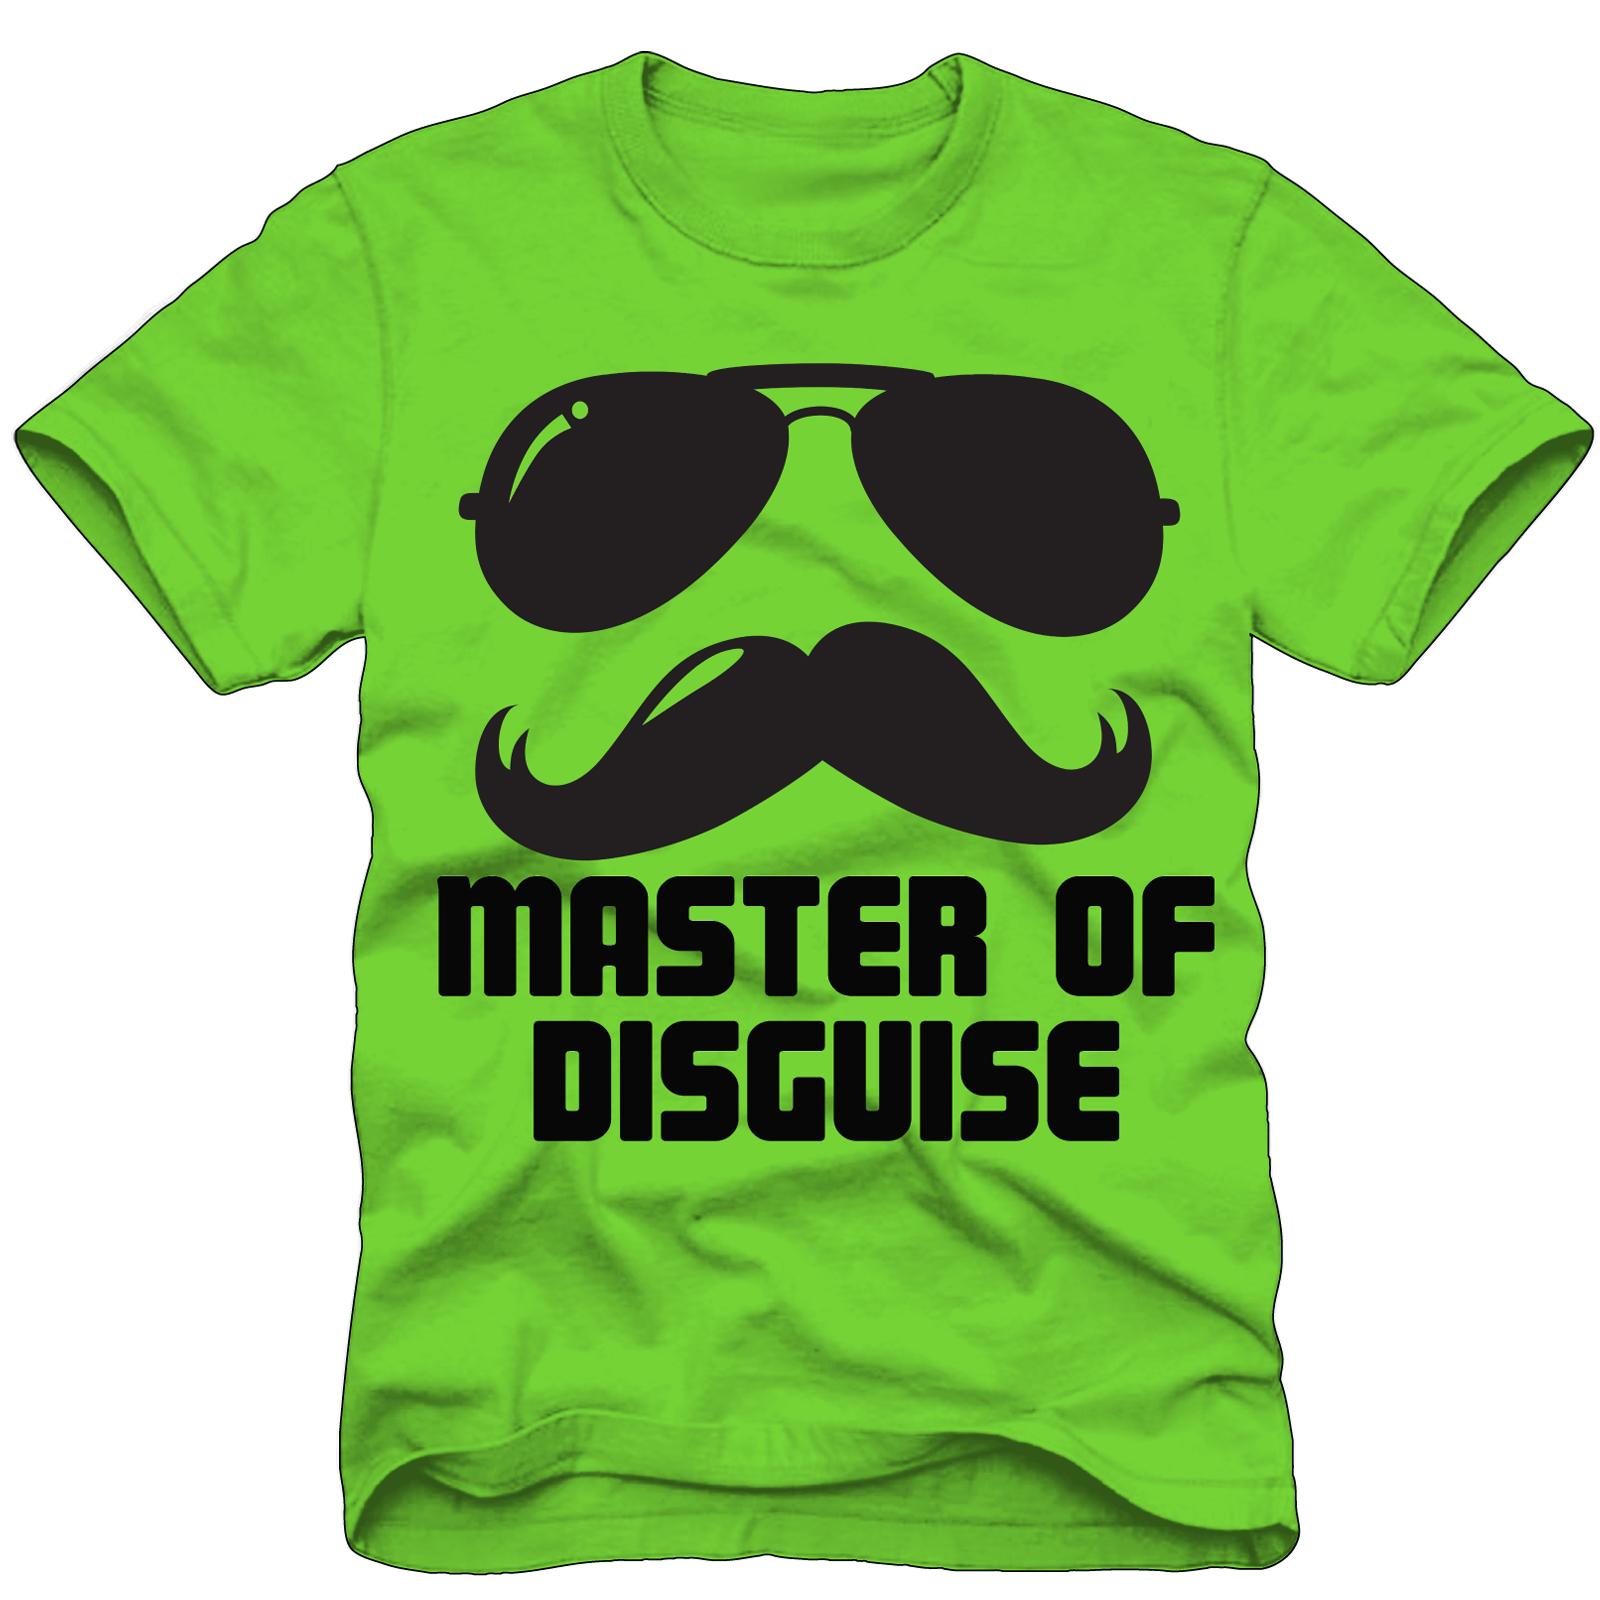 Route 66 Boy's Graphic T-Shirt - Mustache Master of Disguise